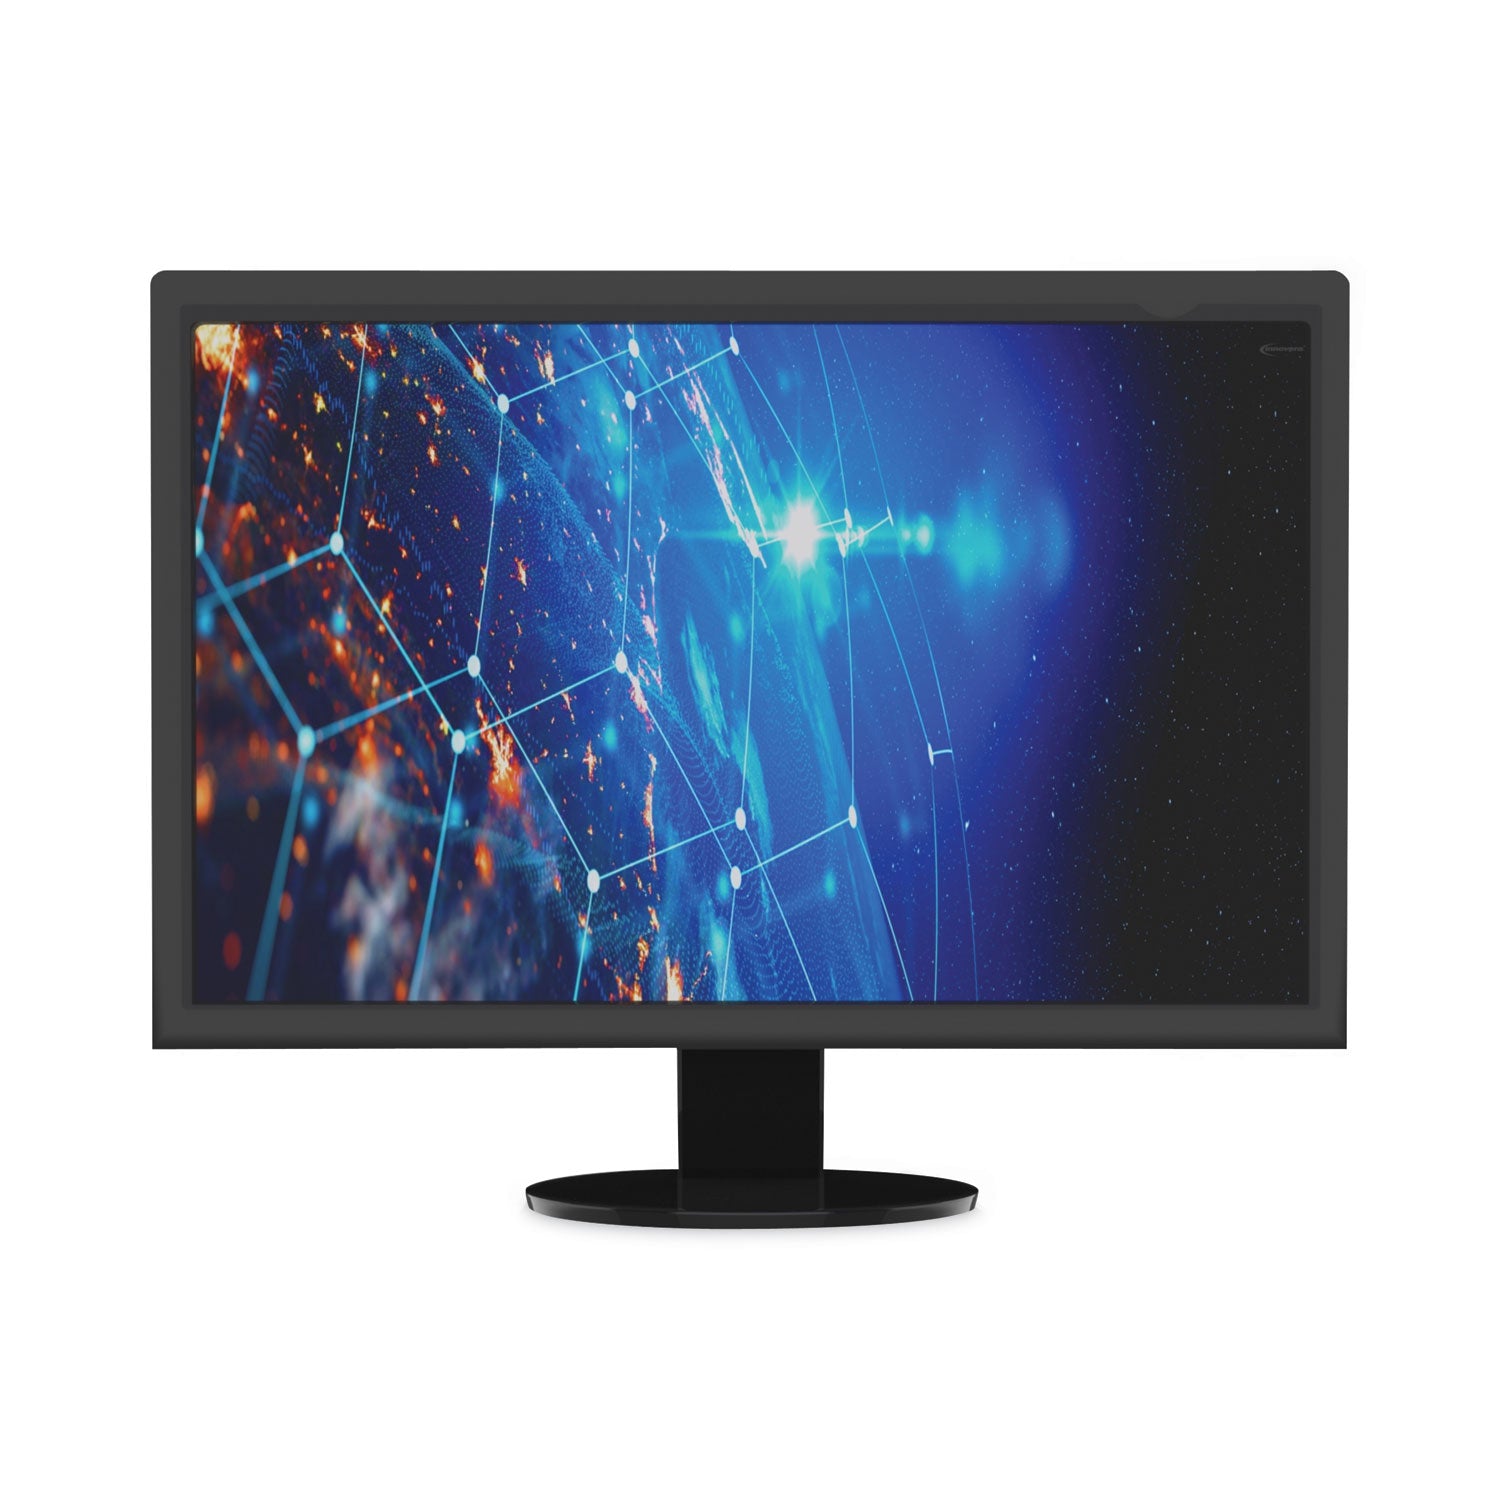 blackout-privacy-filter-for-27-widescreen-flat-panel-monitor-169-aspect-ratio_ivrblf27w - 4